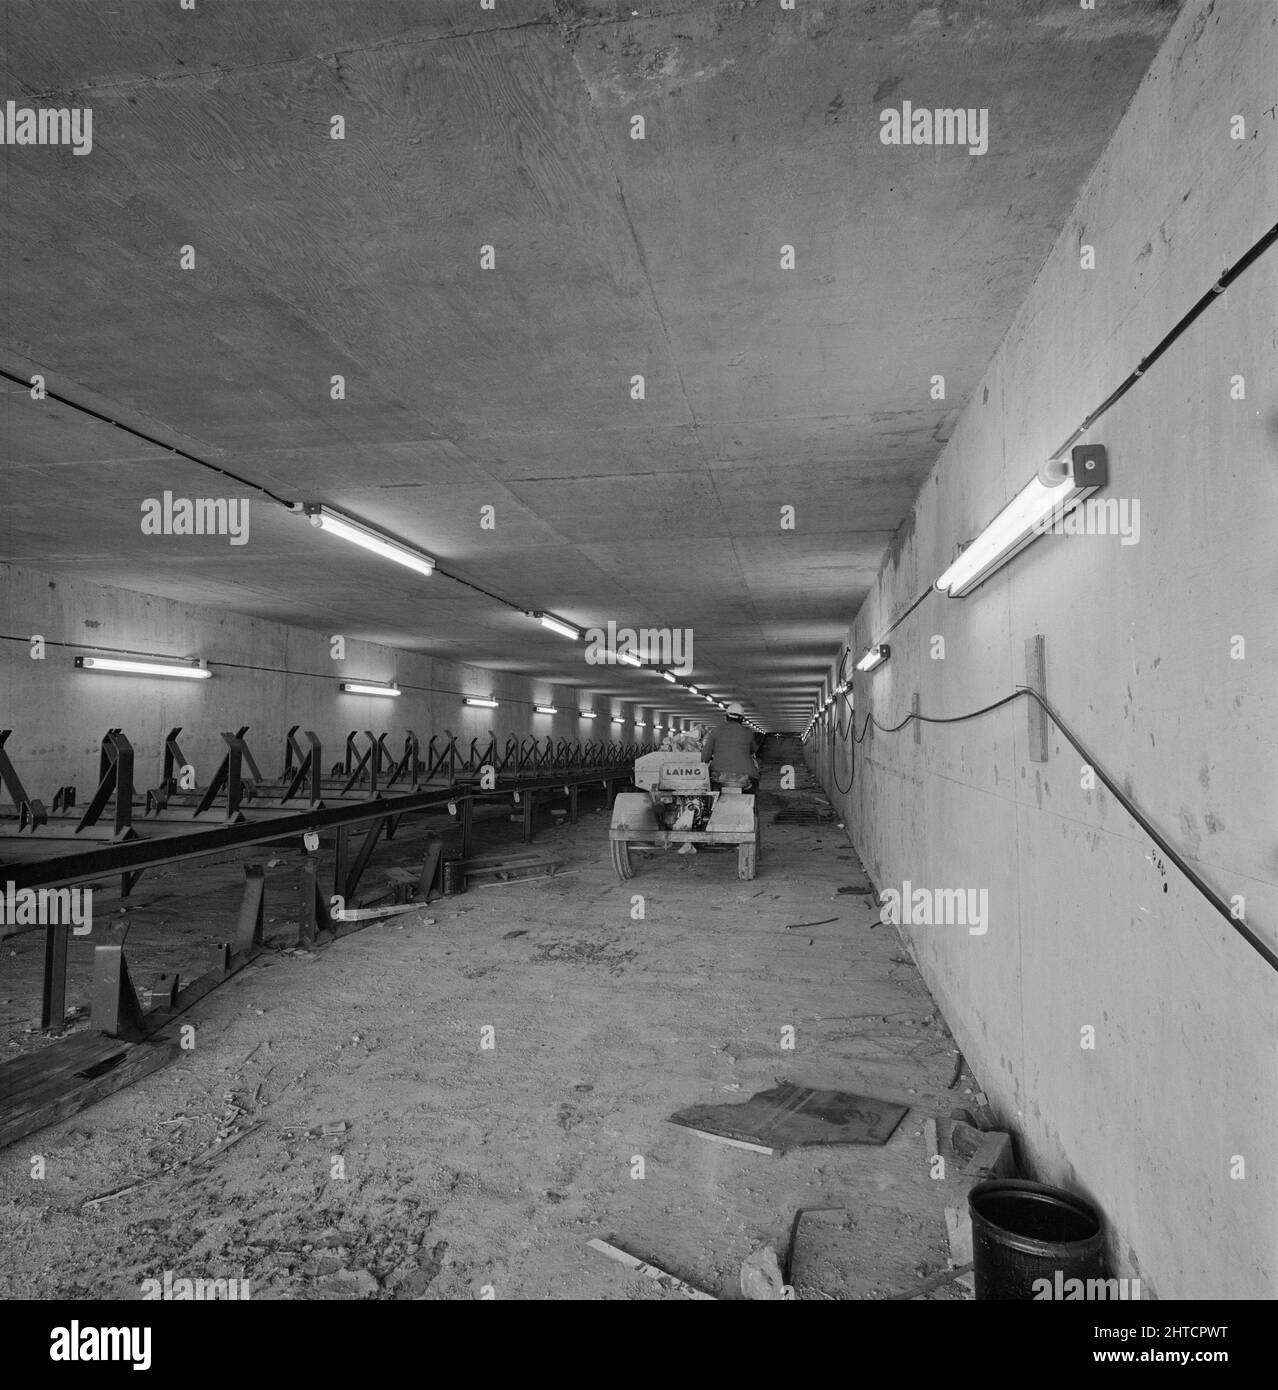 Steel Works, Redcar and Cleveland, North Yorkshire, 16/09/1975. A conveyor belt under construction in a tunnel at the British Steel Works at Redcar. The first phase of Laing's involvement at the Redcar site consisted mostly of the construction of facilities for the reception and storage of raw materials, raw ore, coal and limestone.  A network of tunnels was constructed underground to move these raw materials to the stockyard once delivered by rail. Stock Photo